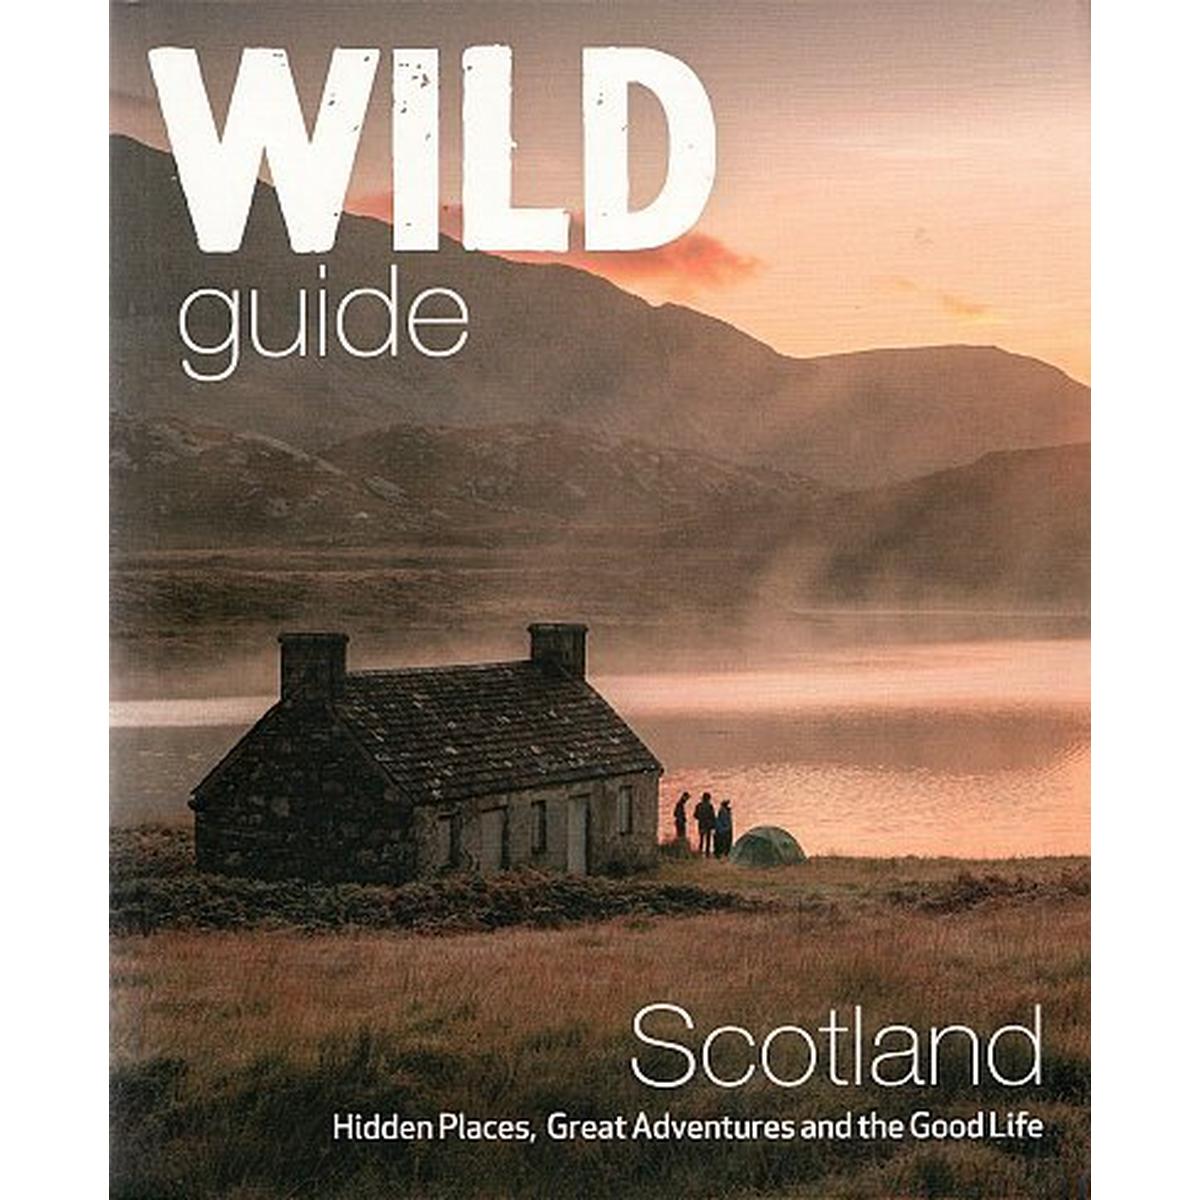 Cordee Wild Guide Scotland (2nd Ed.) - Hidden Places, Great Adventures & the good life